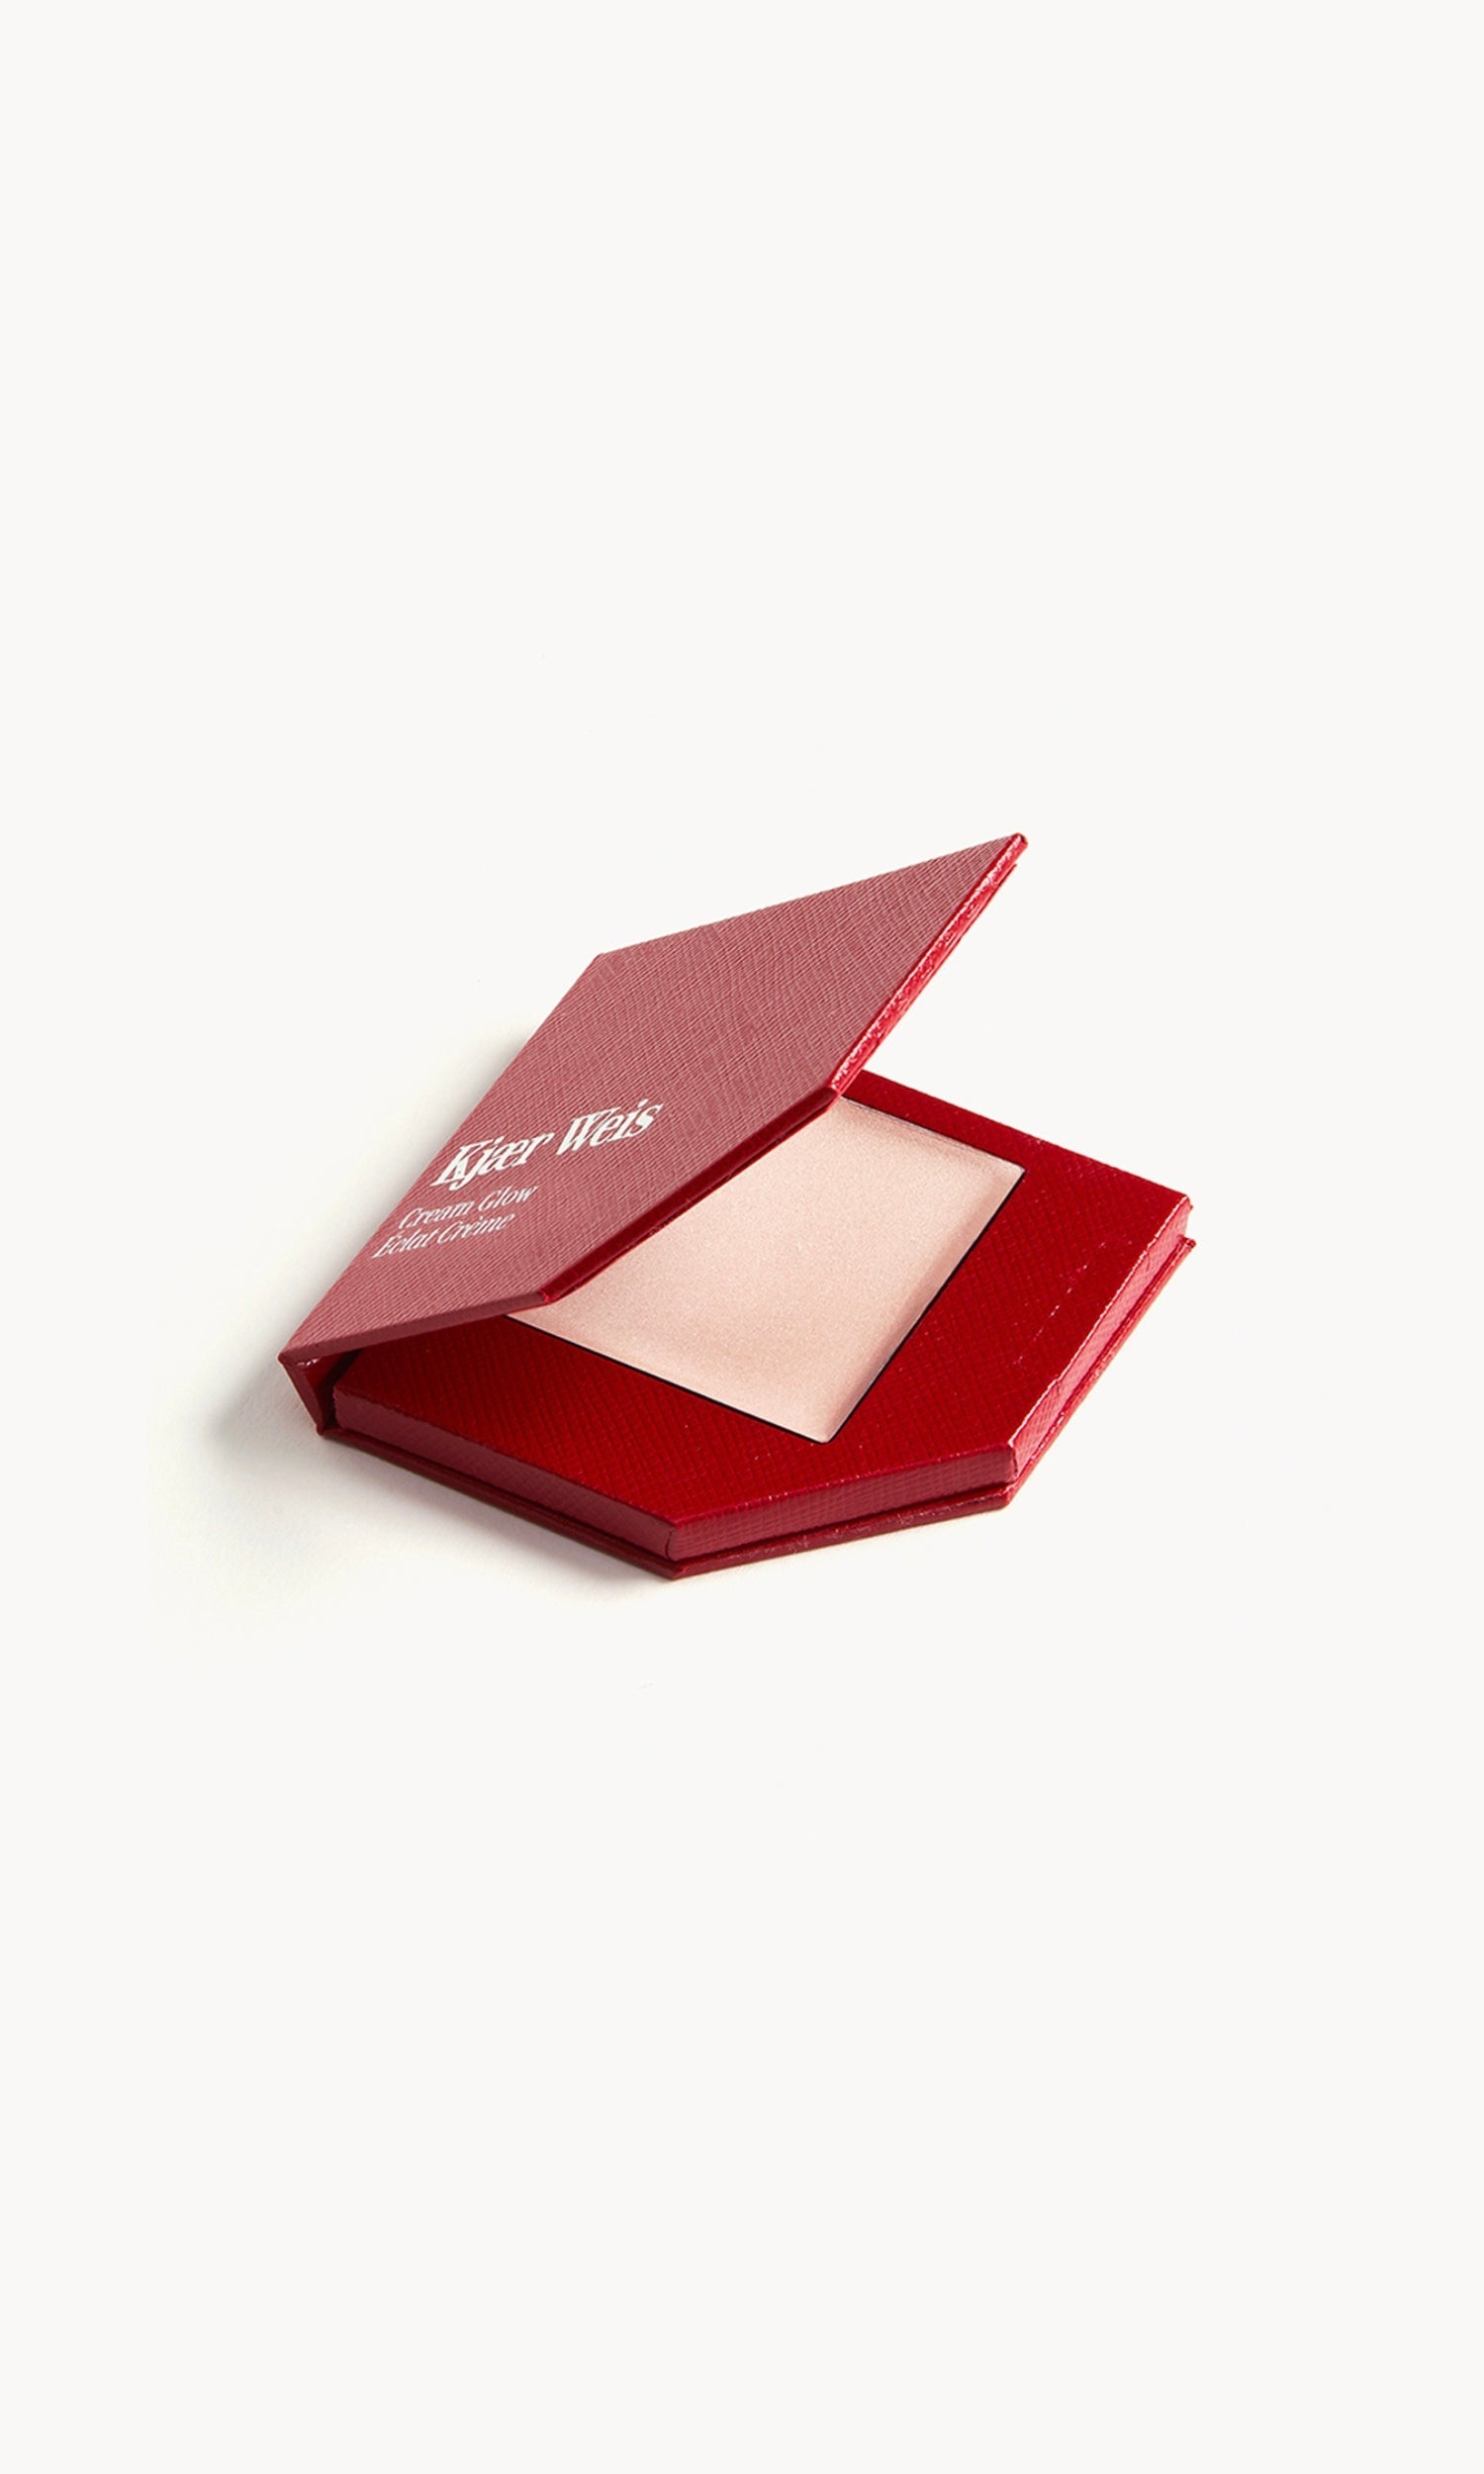 a red kw palette with the lid open to show the cream glow